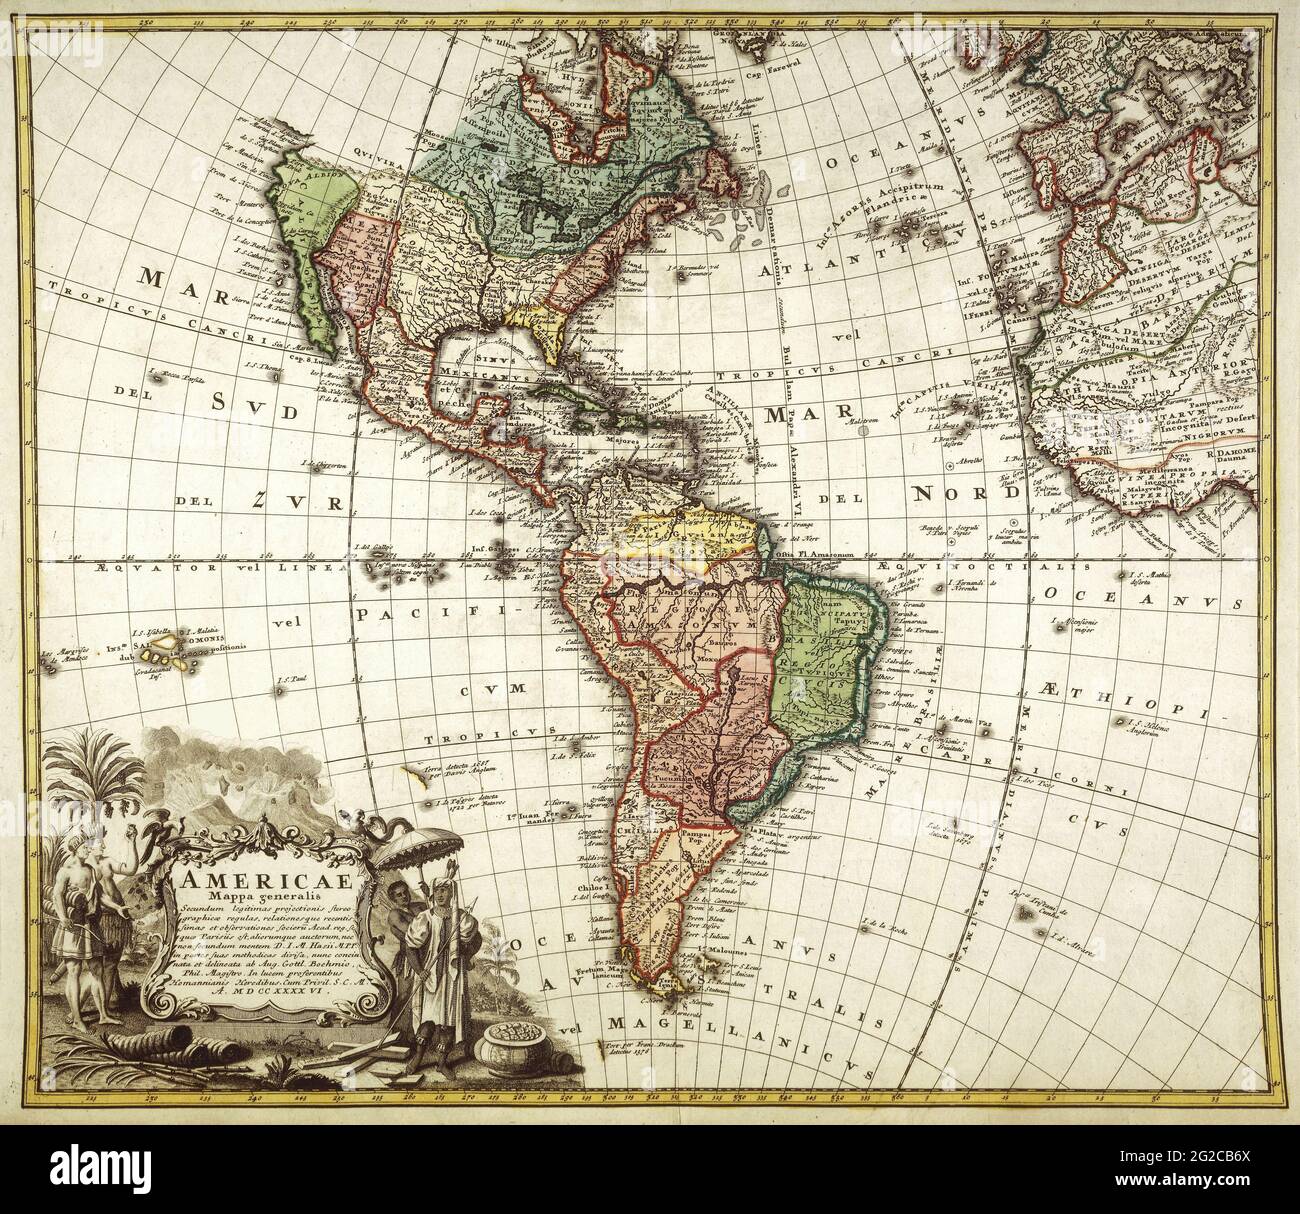 The Americas Map, Map of The Americas, Old Americas Map, Retro Map of The Americas, Vintage Map of the Americas, America Map, Map of America, 1730 Map Stock Photo